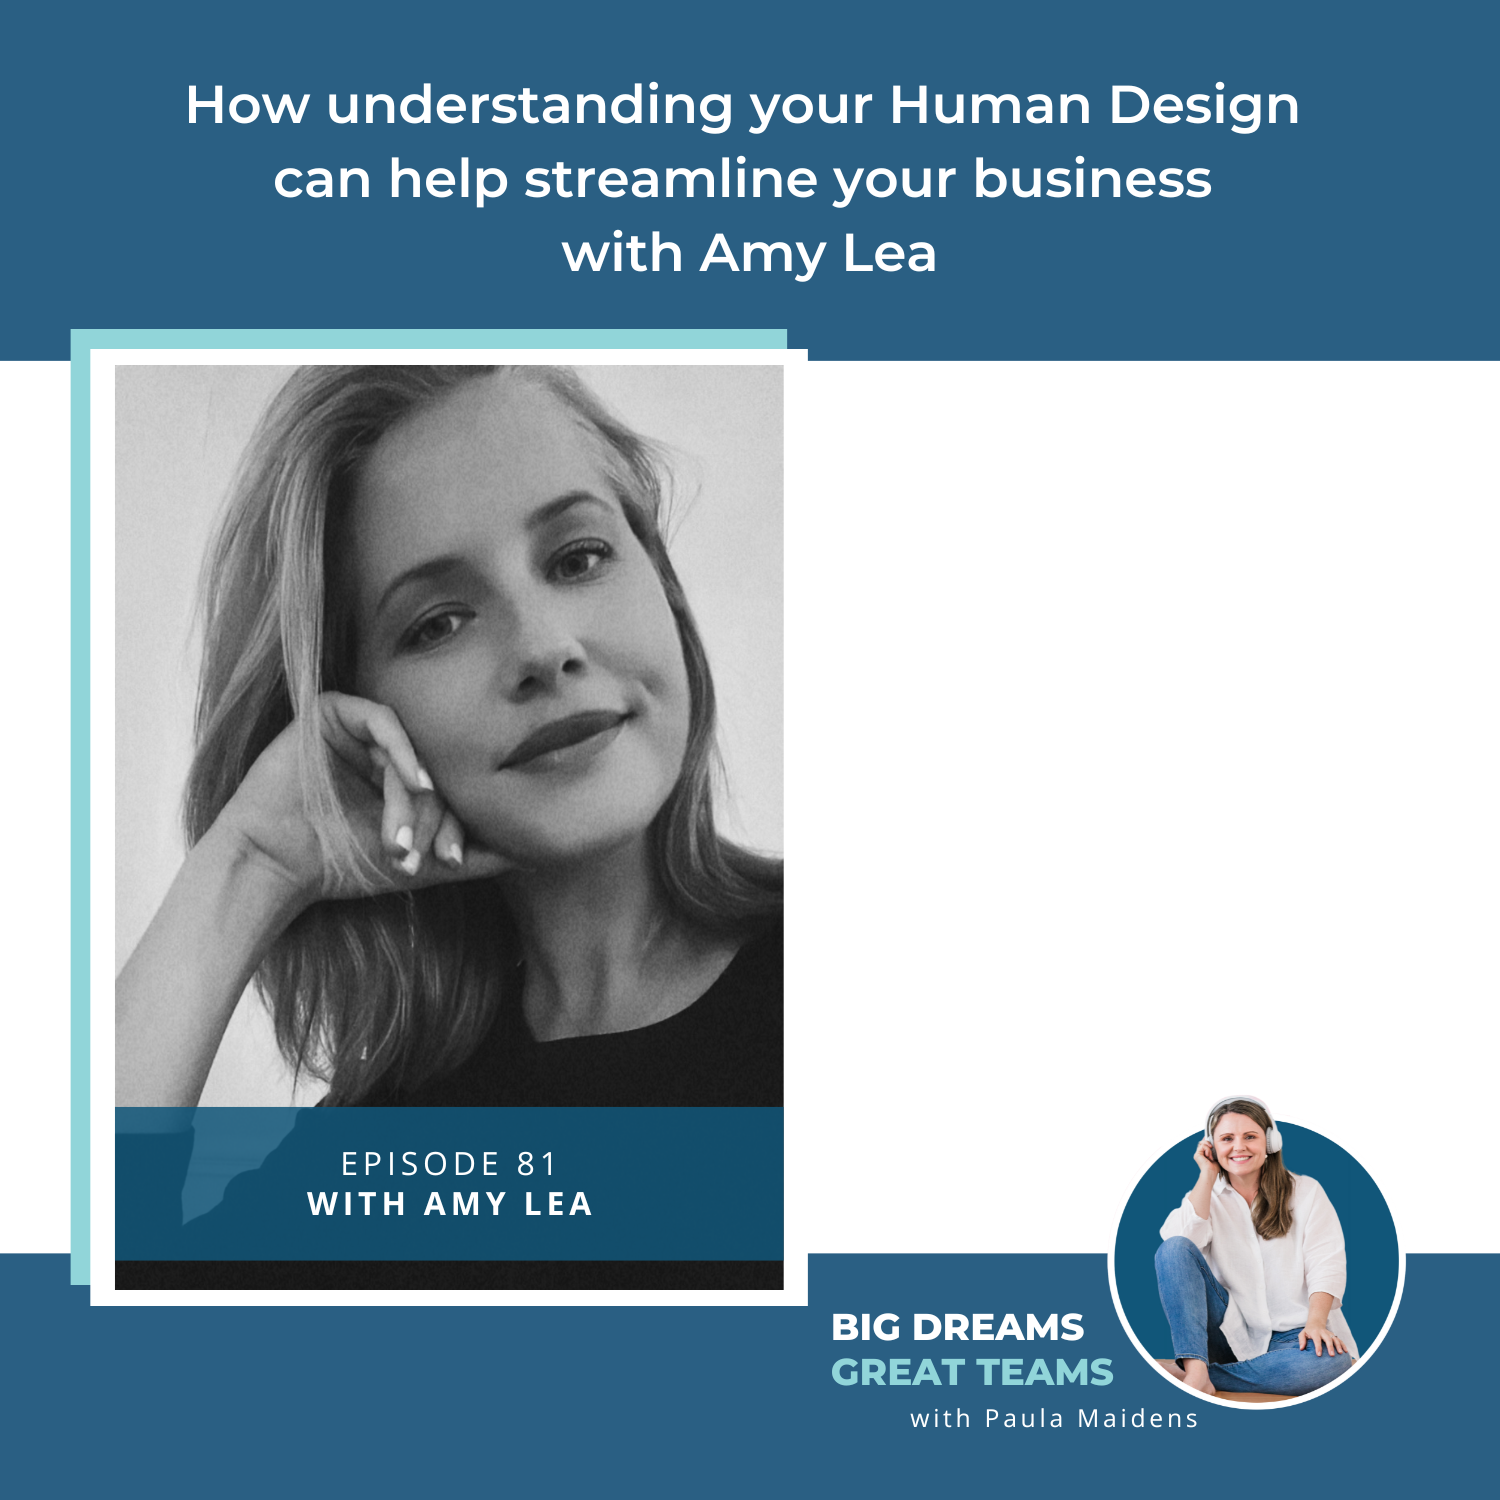 How understanding your Human Design can help streamline your business with Amy Lea